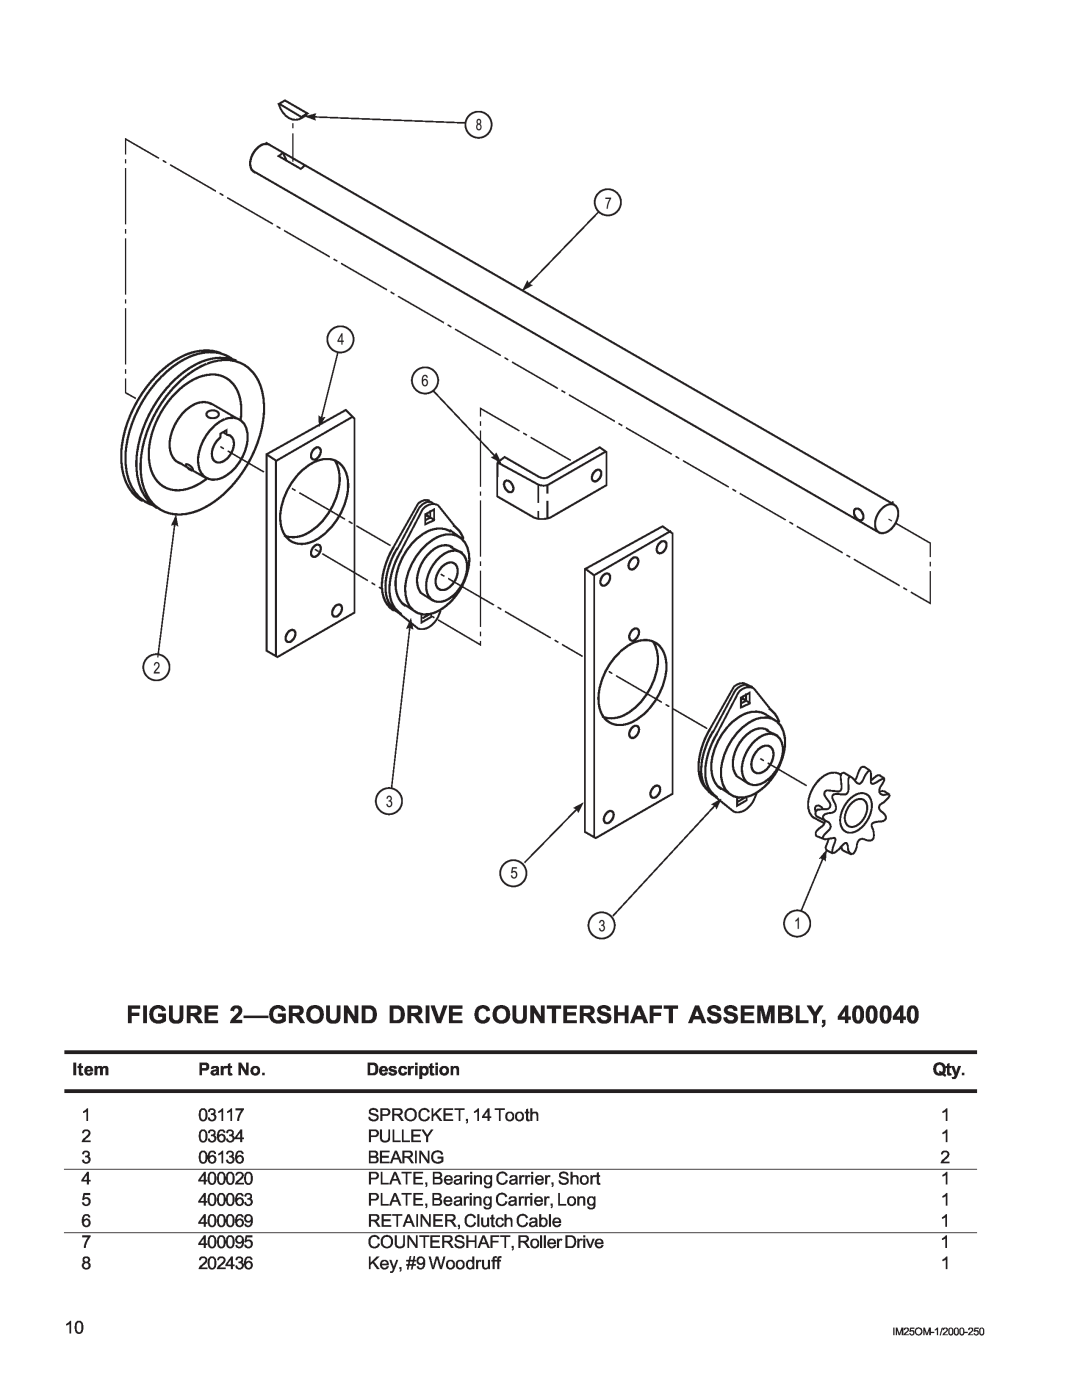 National Mower IM25 manual Ground Drive Countershaft Assembly 